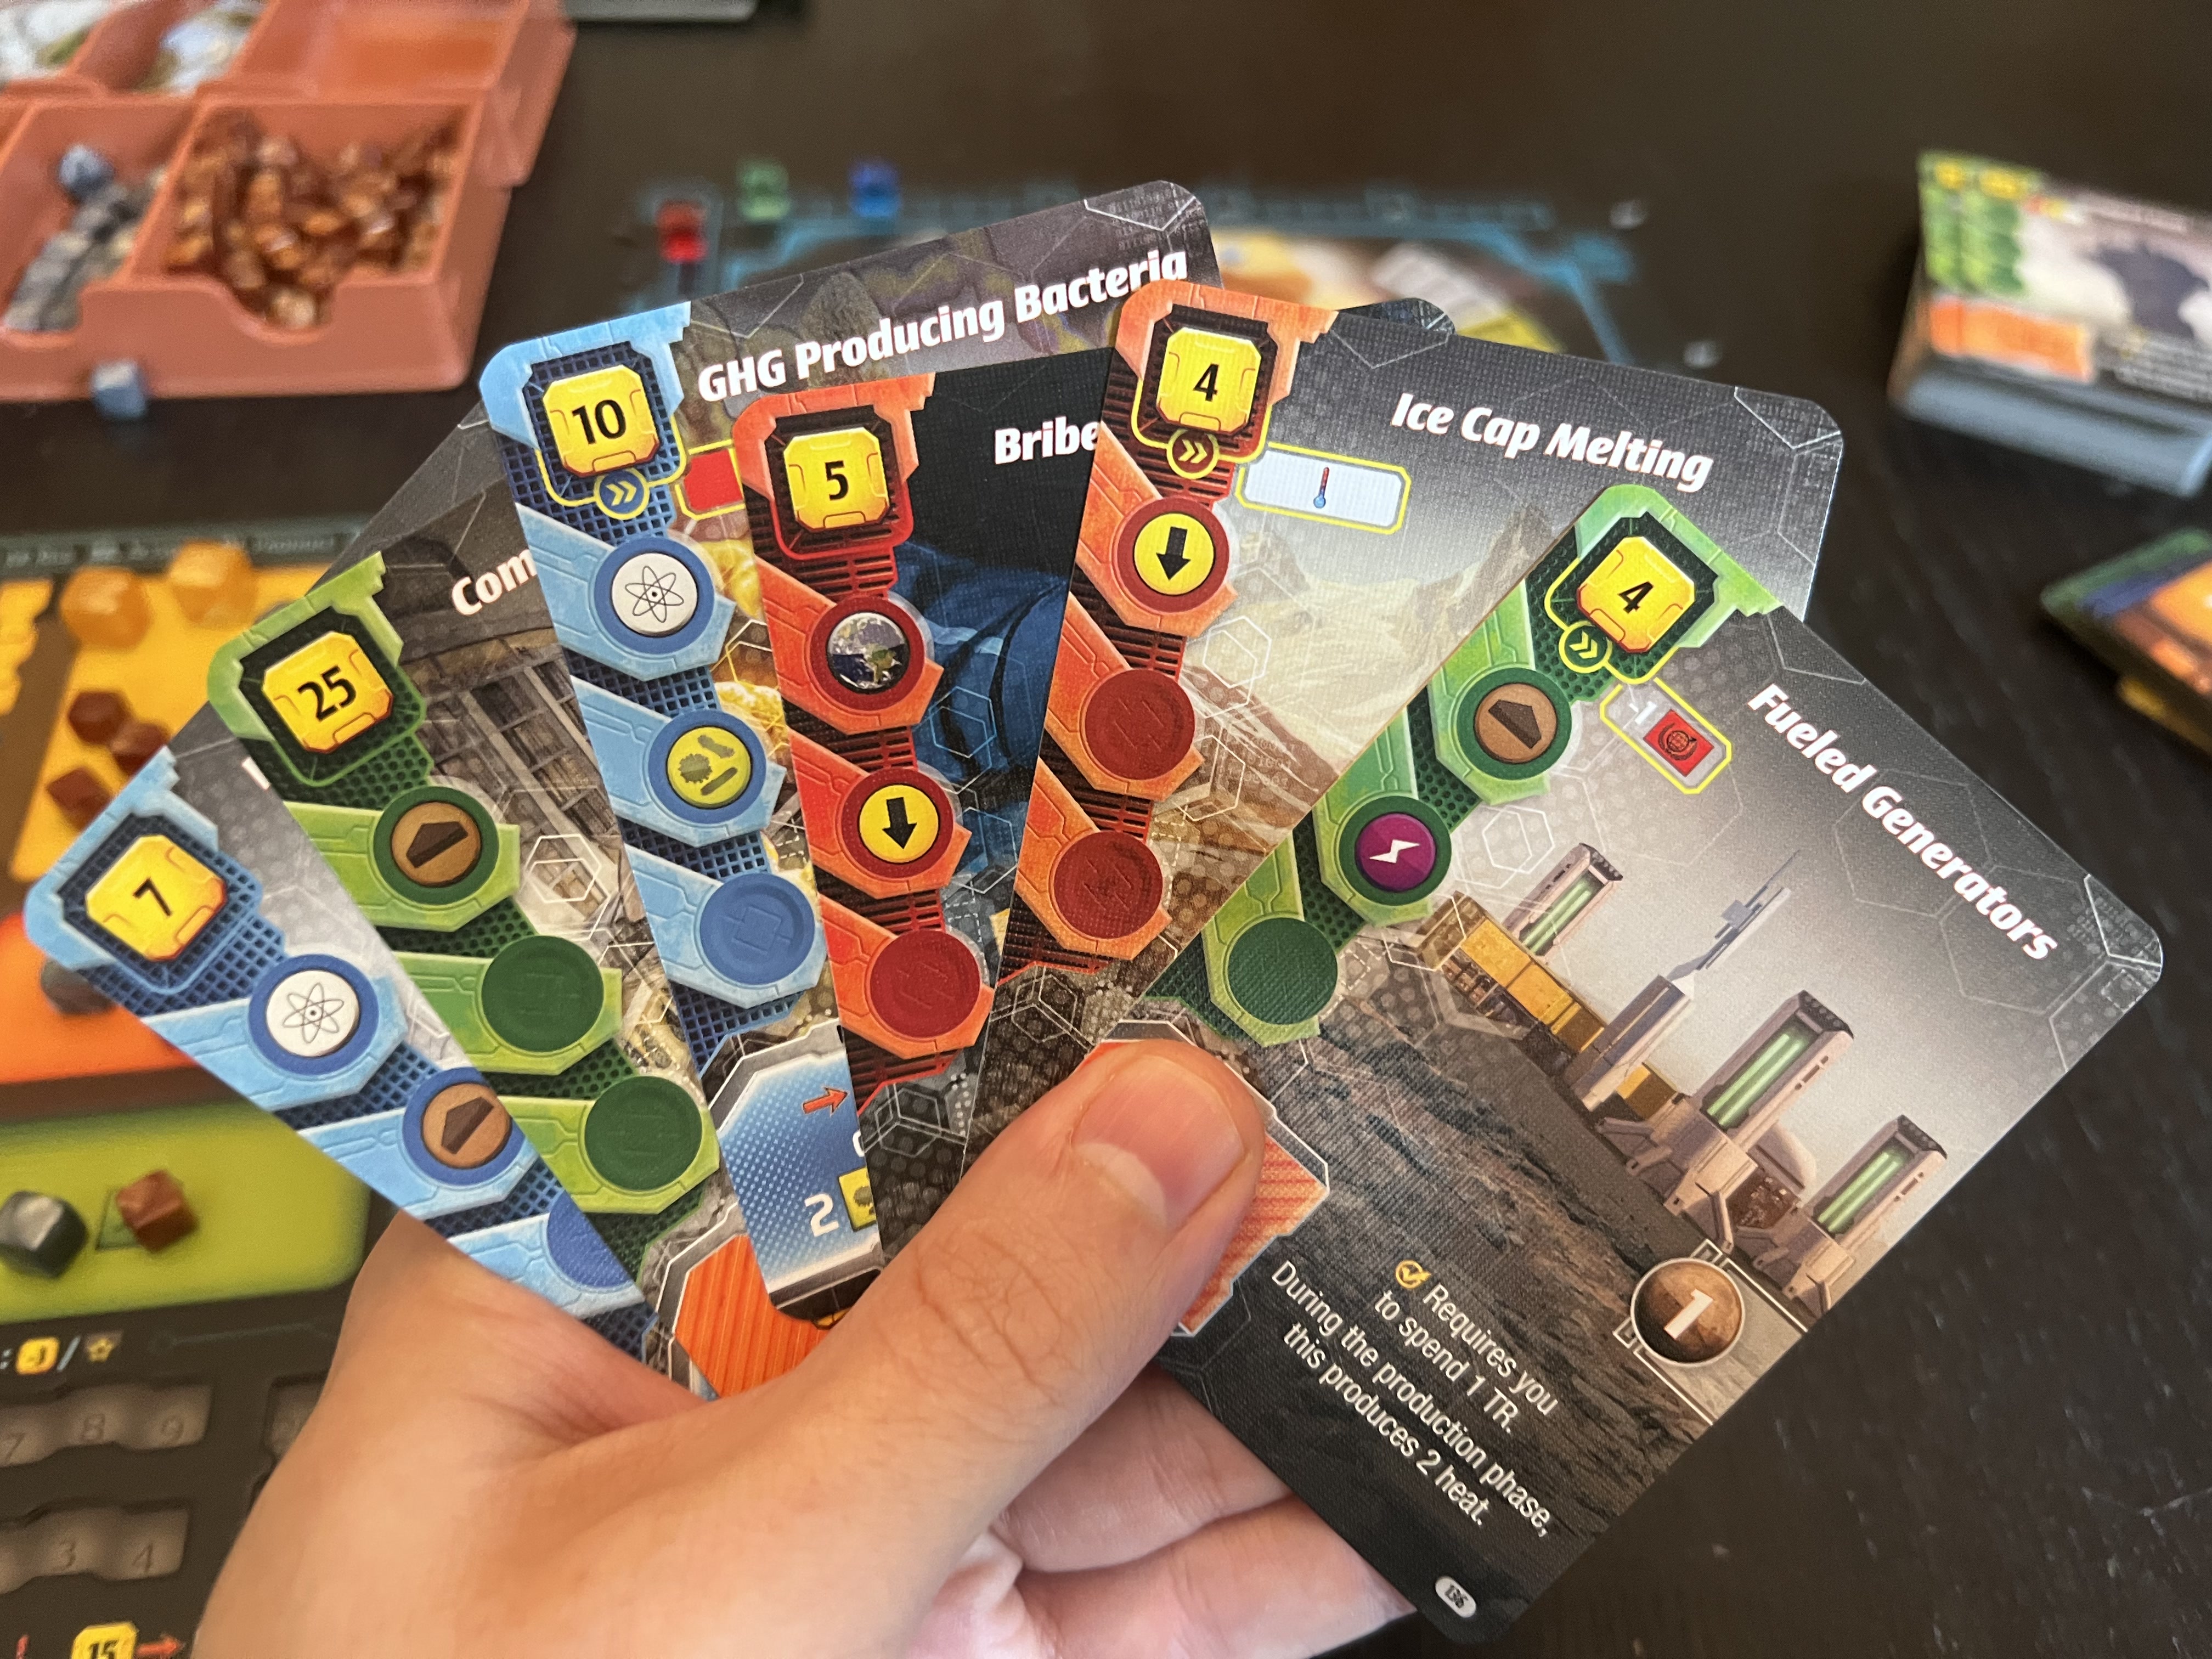 The Terraforming Mars card game is as good as we'd hoped it would